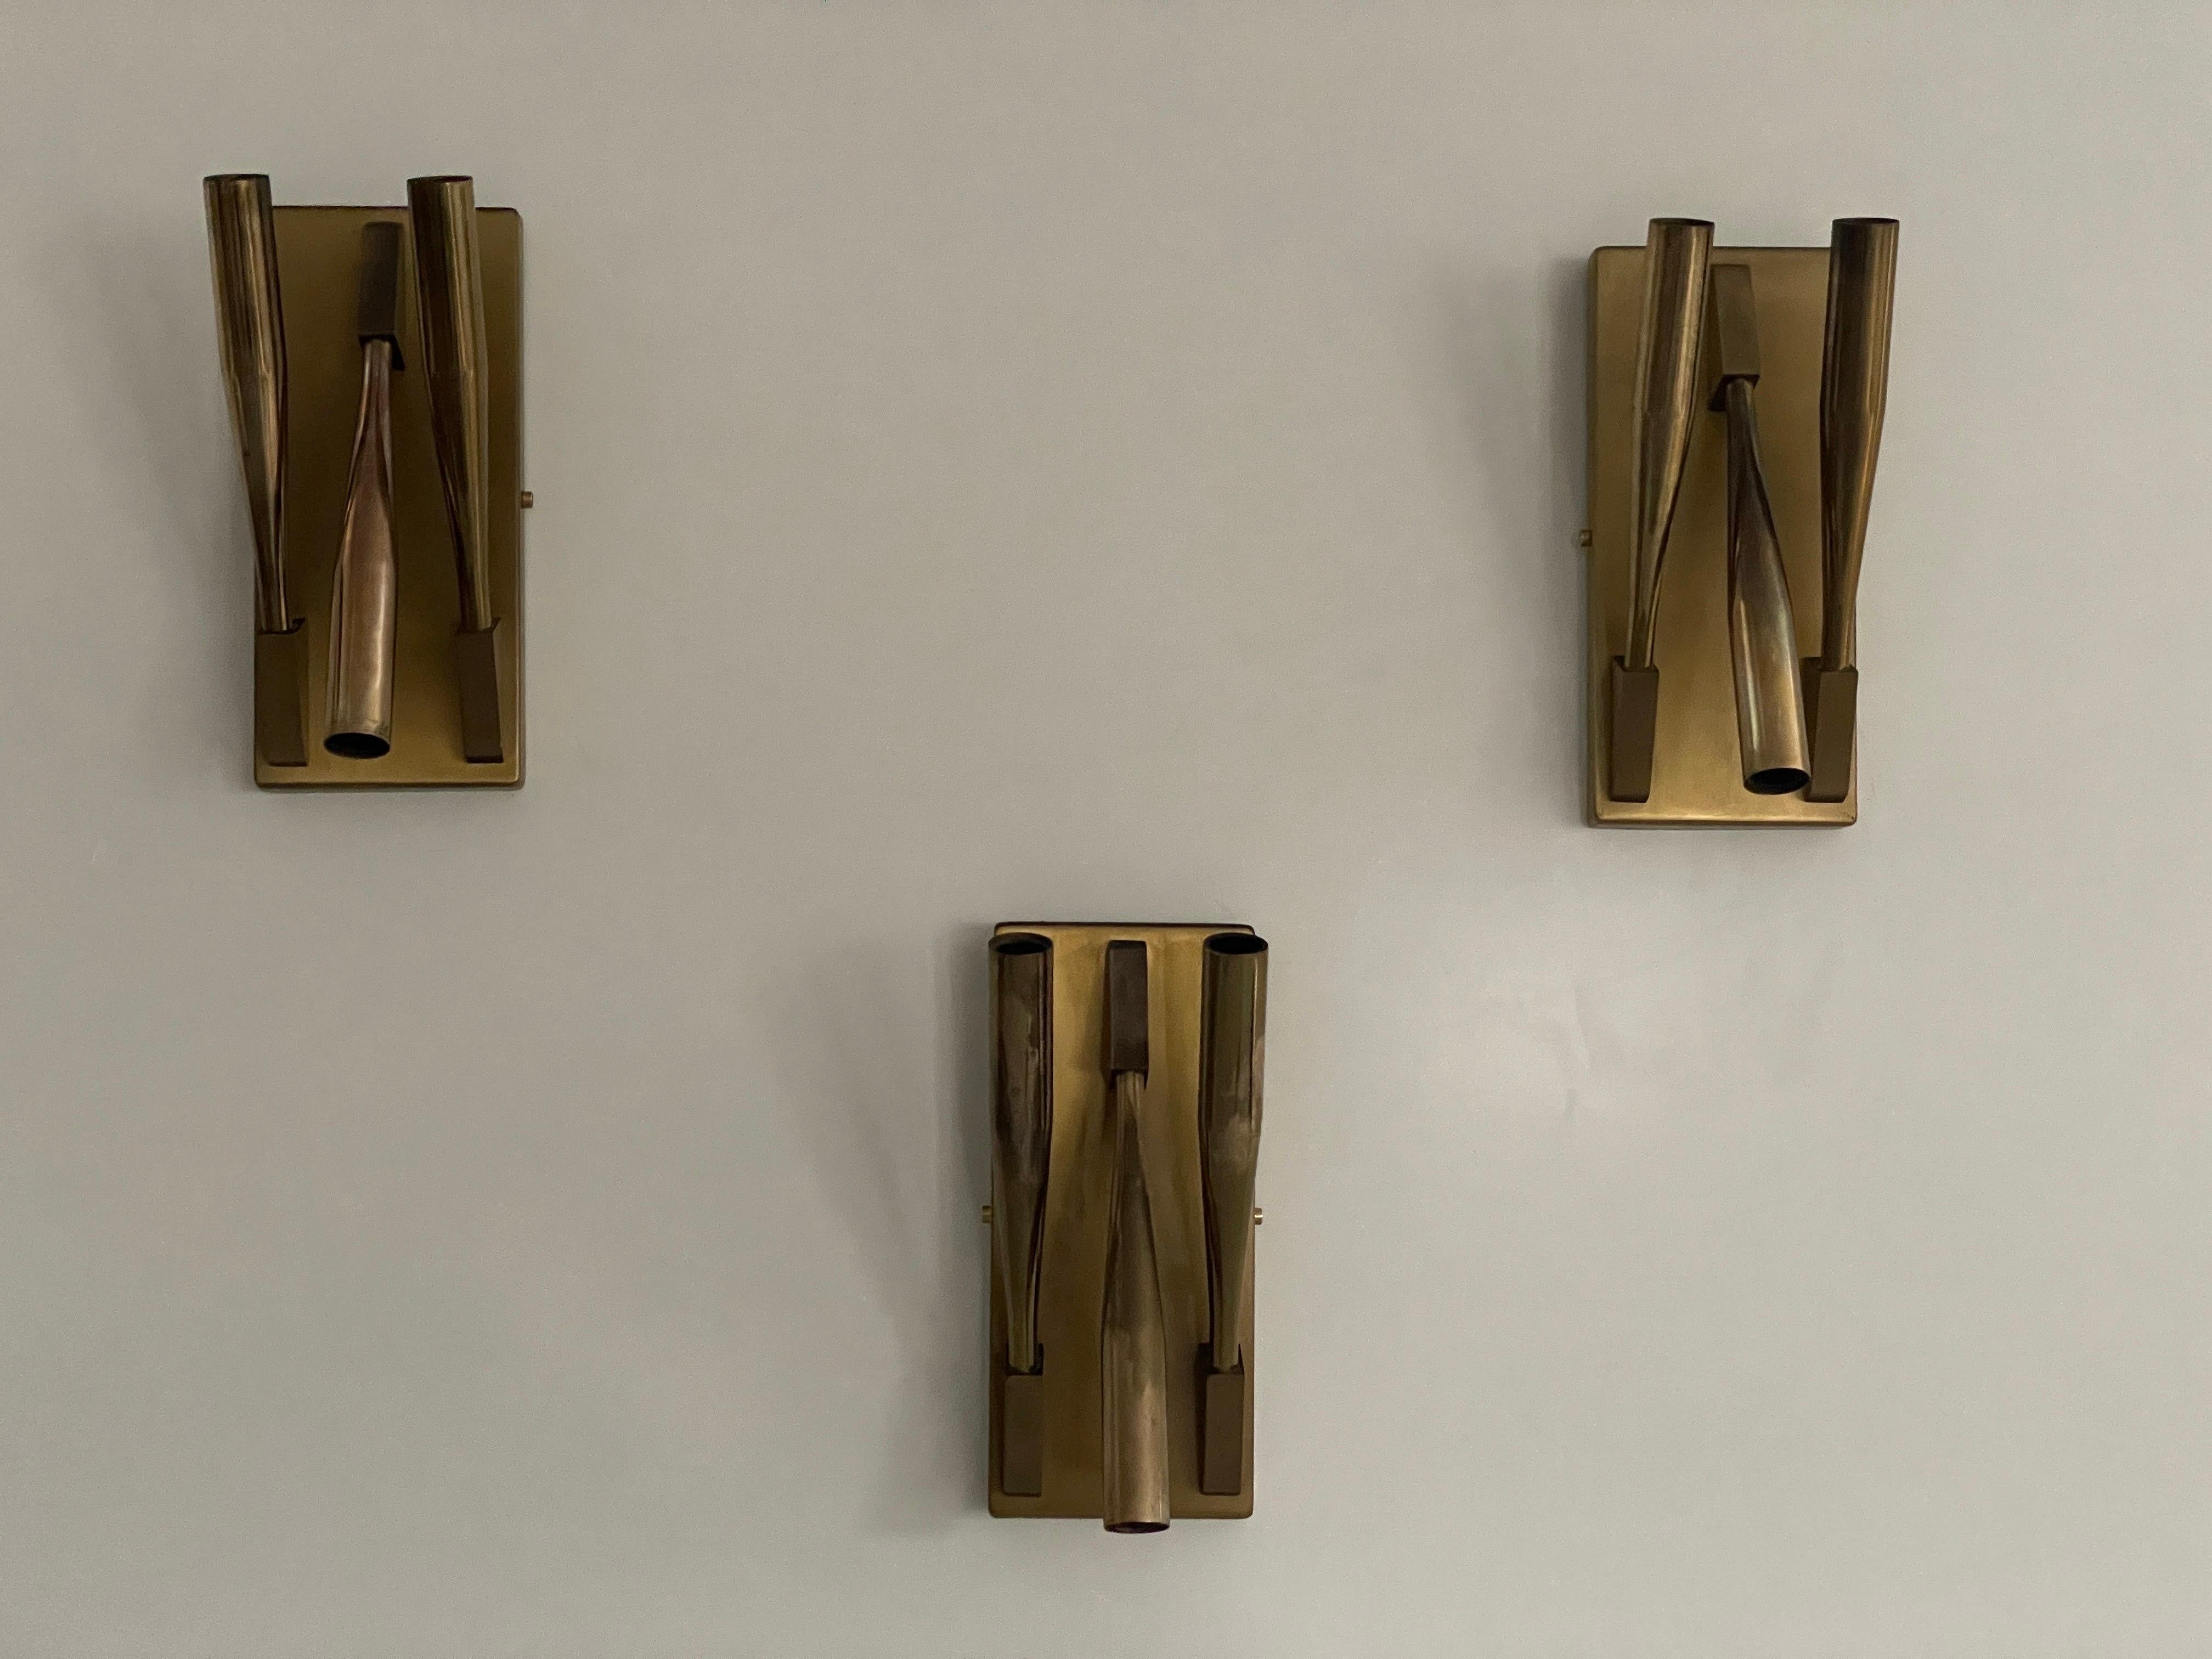 Brass Triple Tube Shade Set of 3 Sconces Attributed Gio Ponti, 1950s, Italy

Very elegant and Minimalist heavy wall lamps
Lamps are in very good condition.

These lamps works with 3x E14 standard light bulbs. 
Wired and suitable to use in all